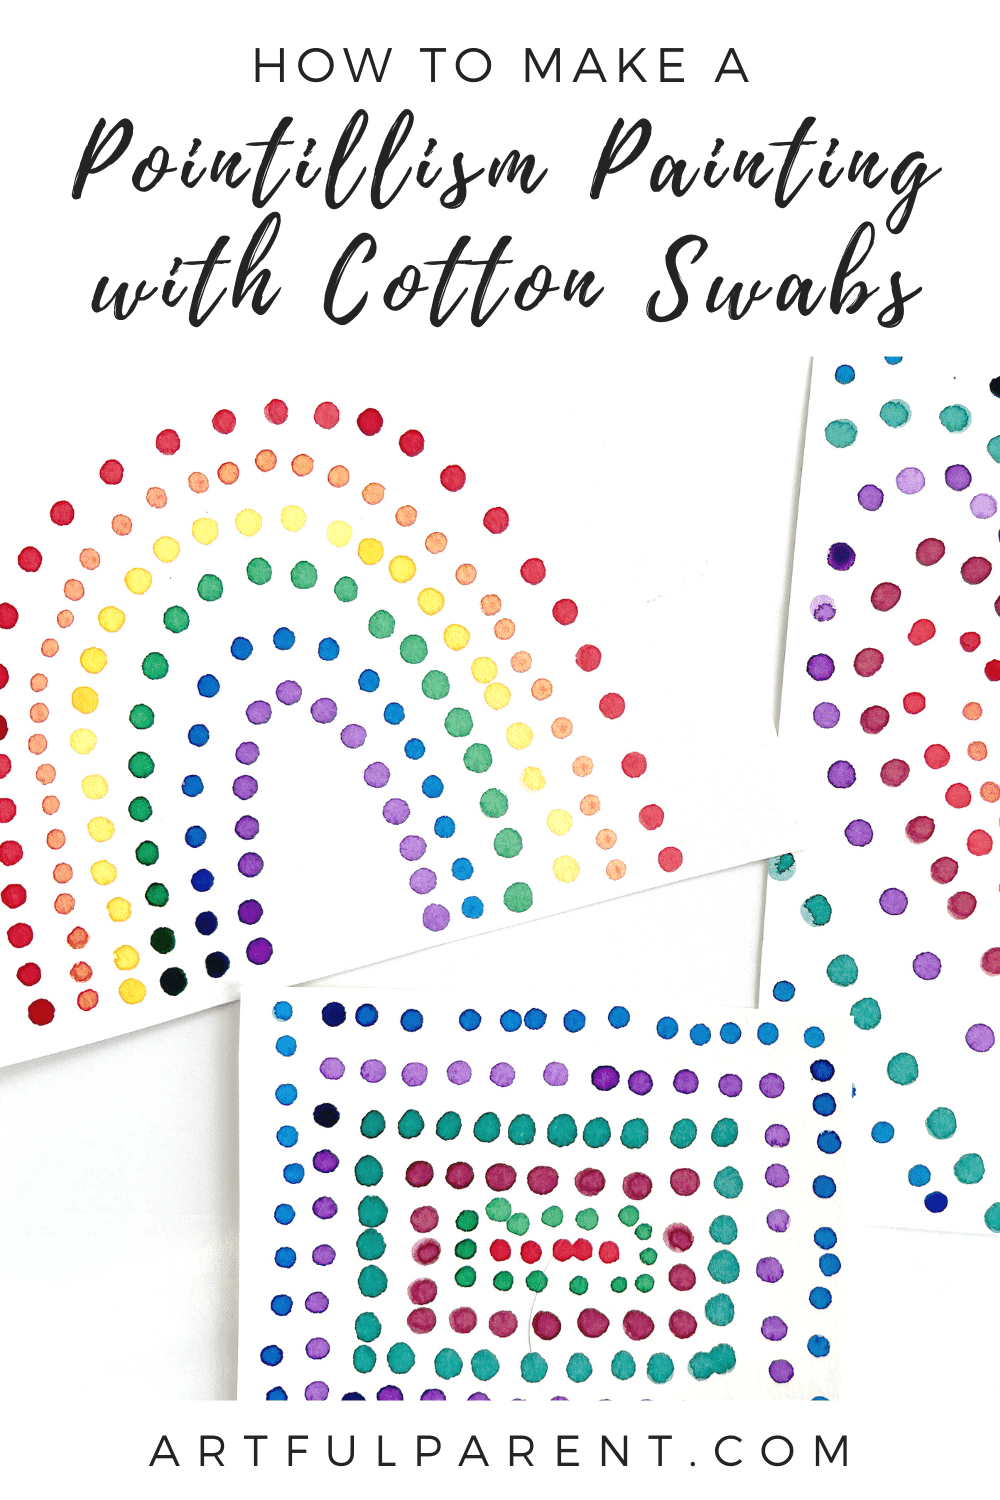 How to Do Pointillism Painting with Cotton Swabs